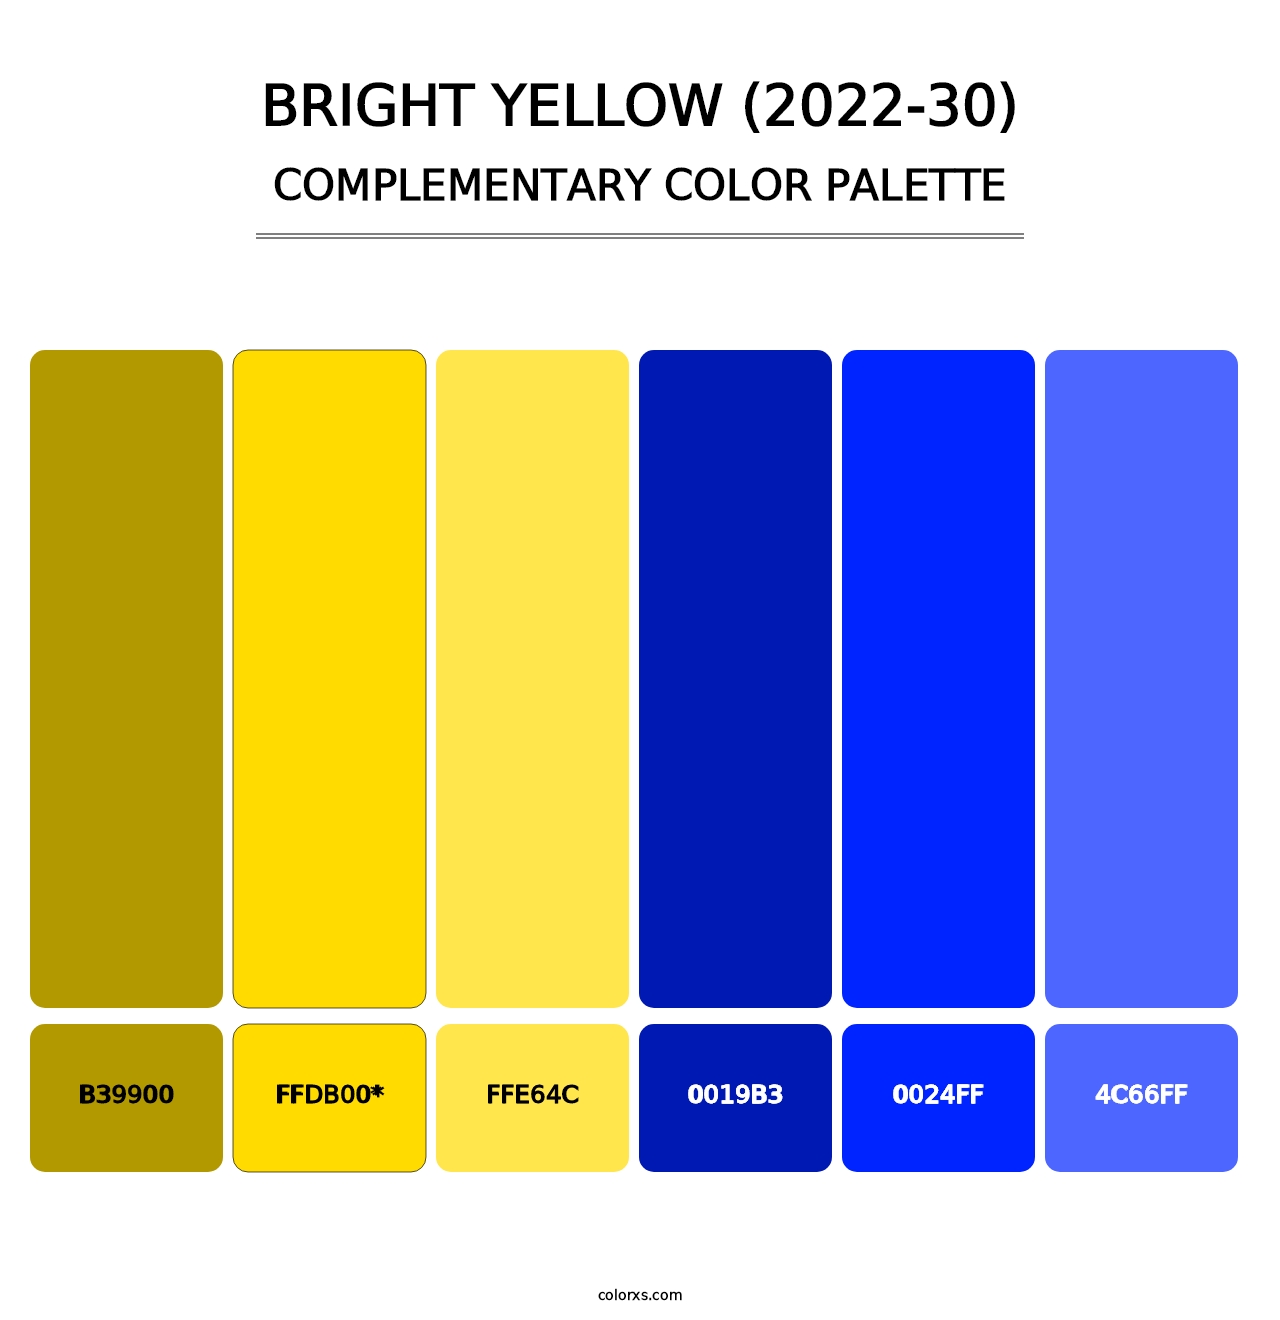 Bright Yellow (2022-30) - Complementary Color Palette